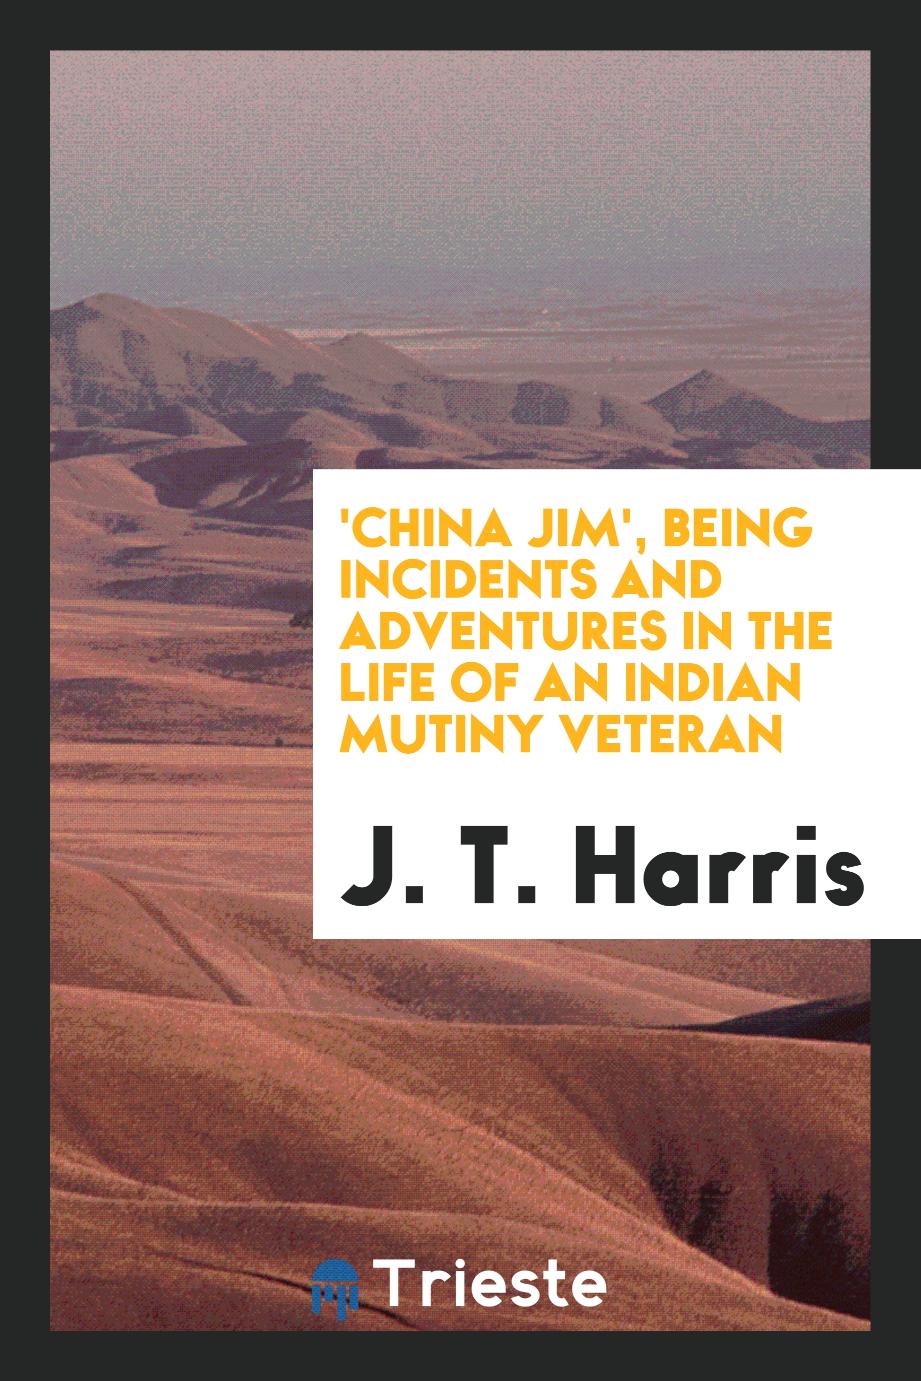 'China Jim', Being Incidents and Adventures in the Life of an Indian Mutiny Veteran